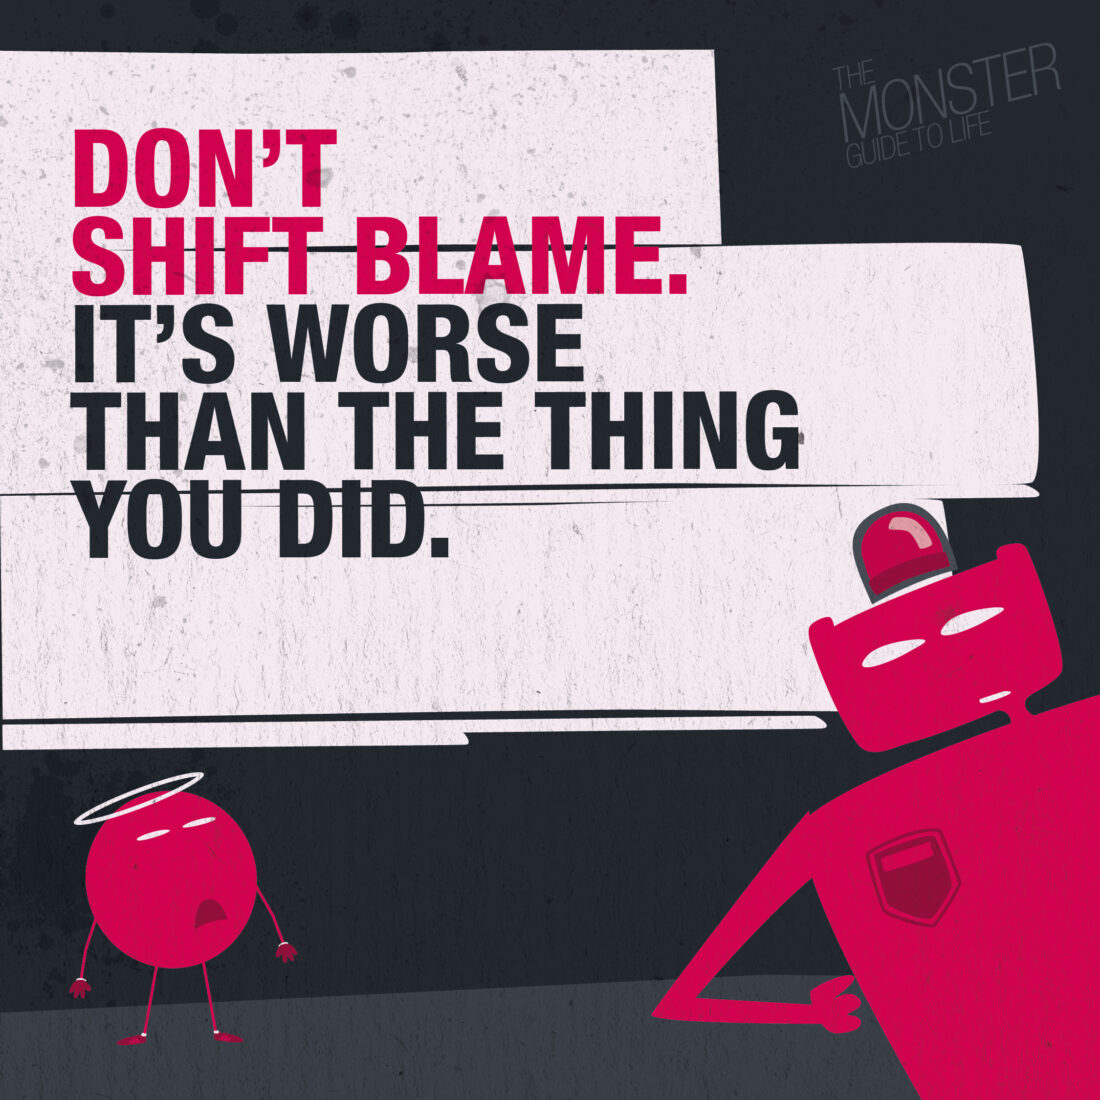 Don't shift blame, it's worse than the thing you did